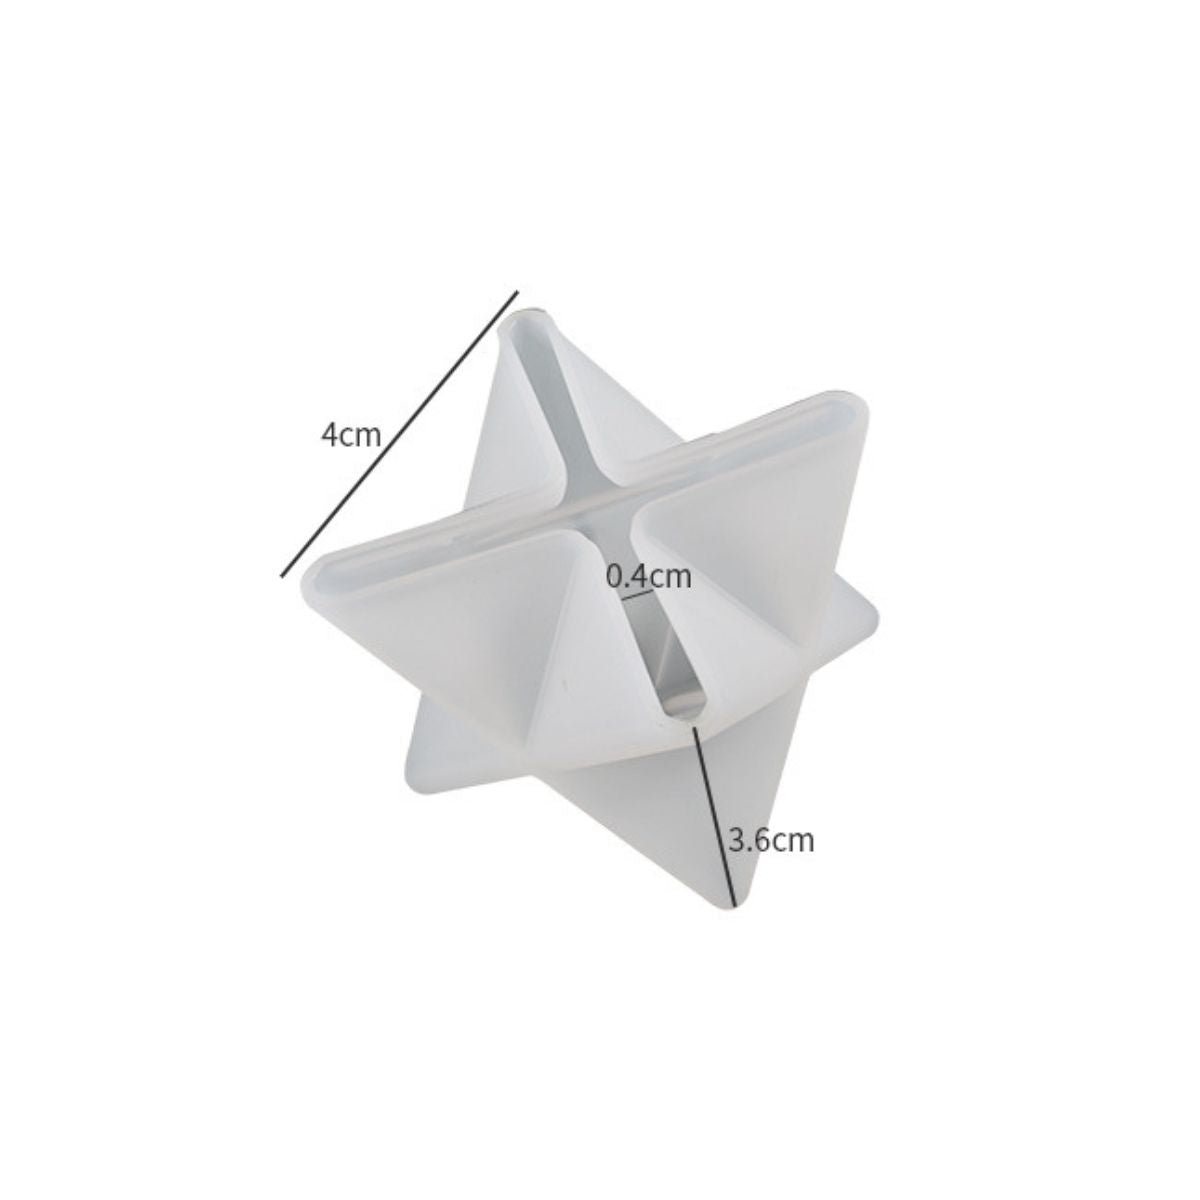 3D Star Shape Resin Silicone Mold - size 4x4 x 3.6cm